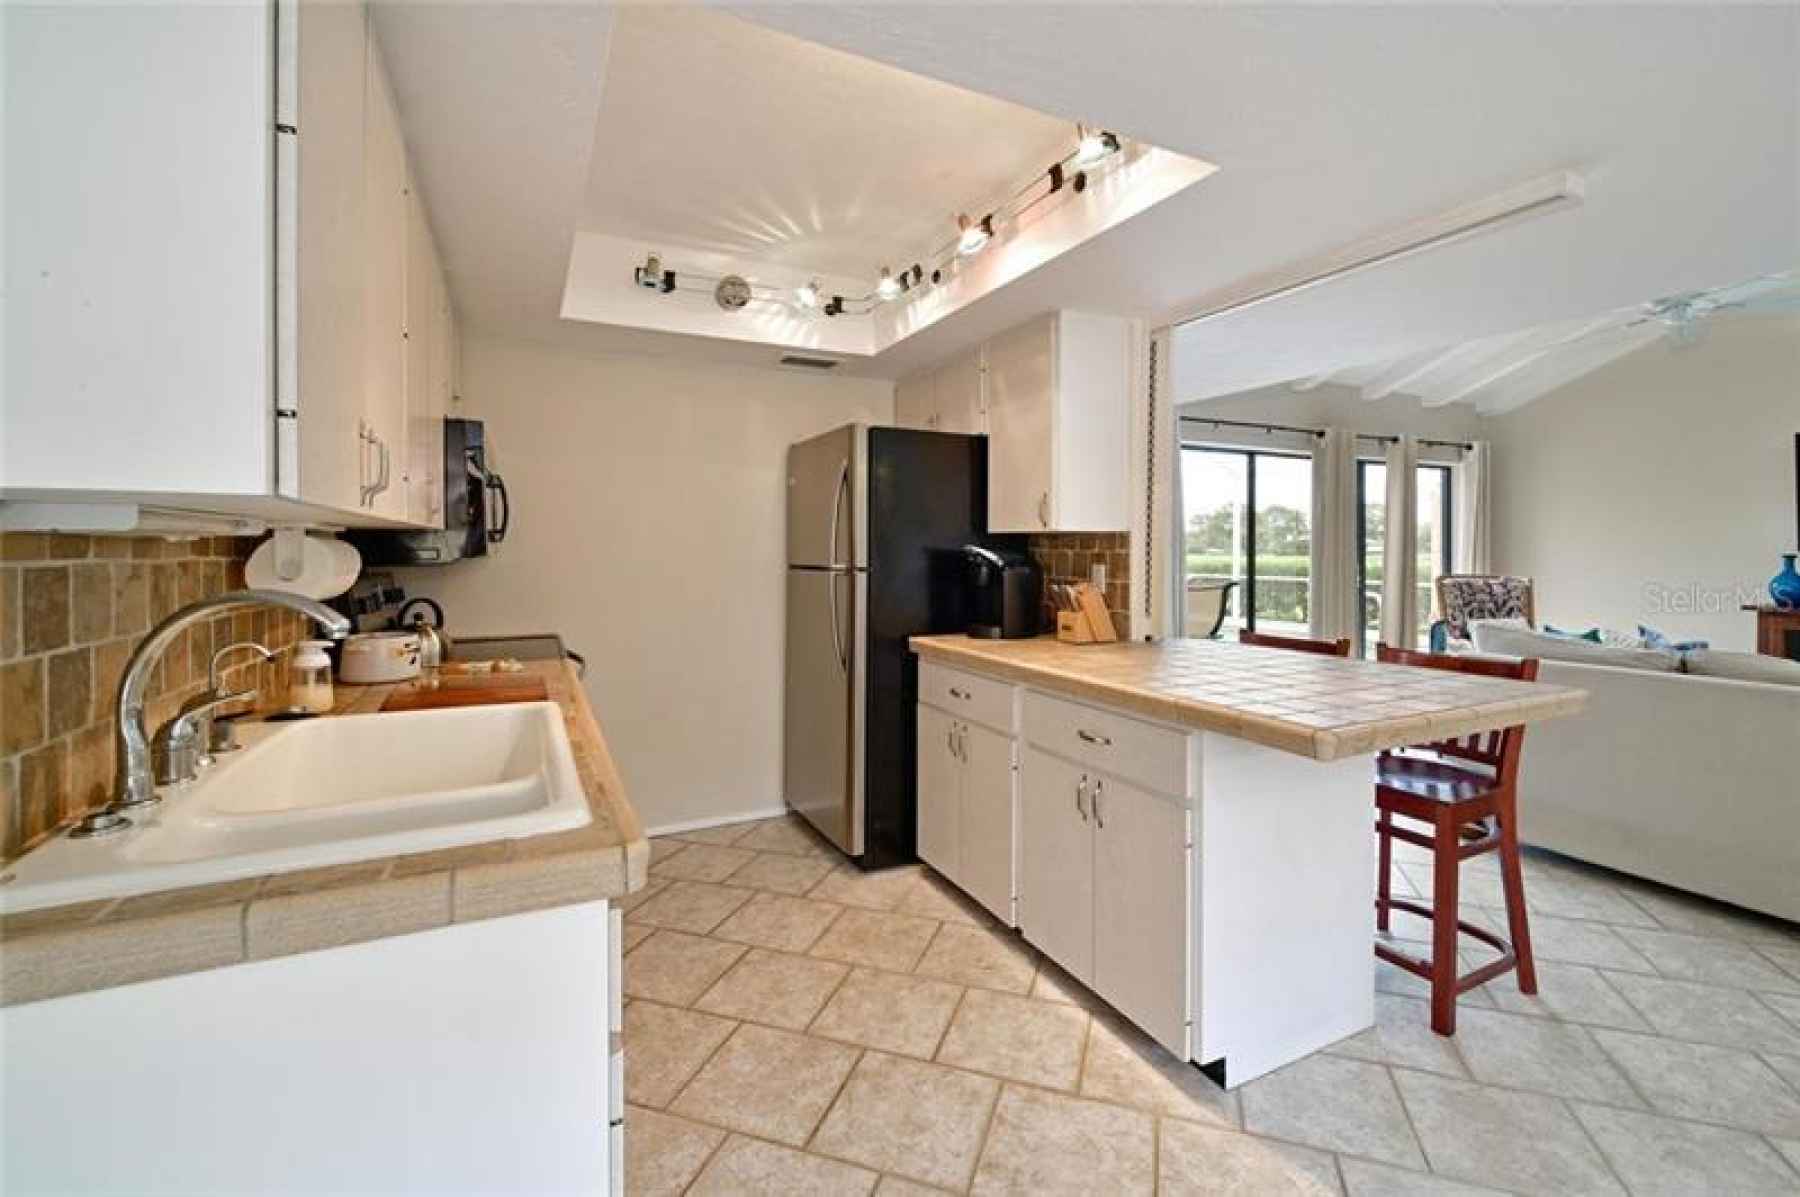 Open Kitchen with Breakfast Bar and Eat-in-Area.  Wood Cabinets, Stone Counter Tops, Stainless Appli